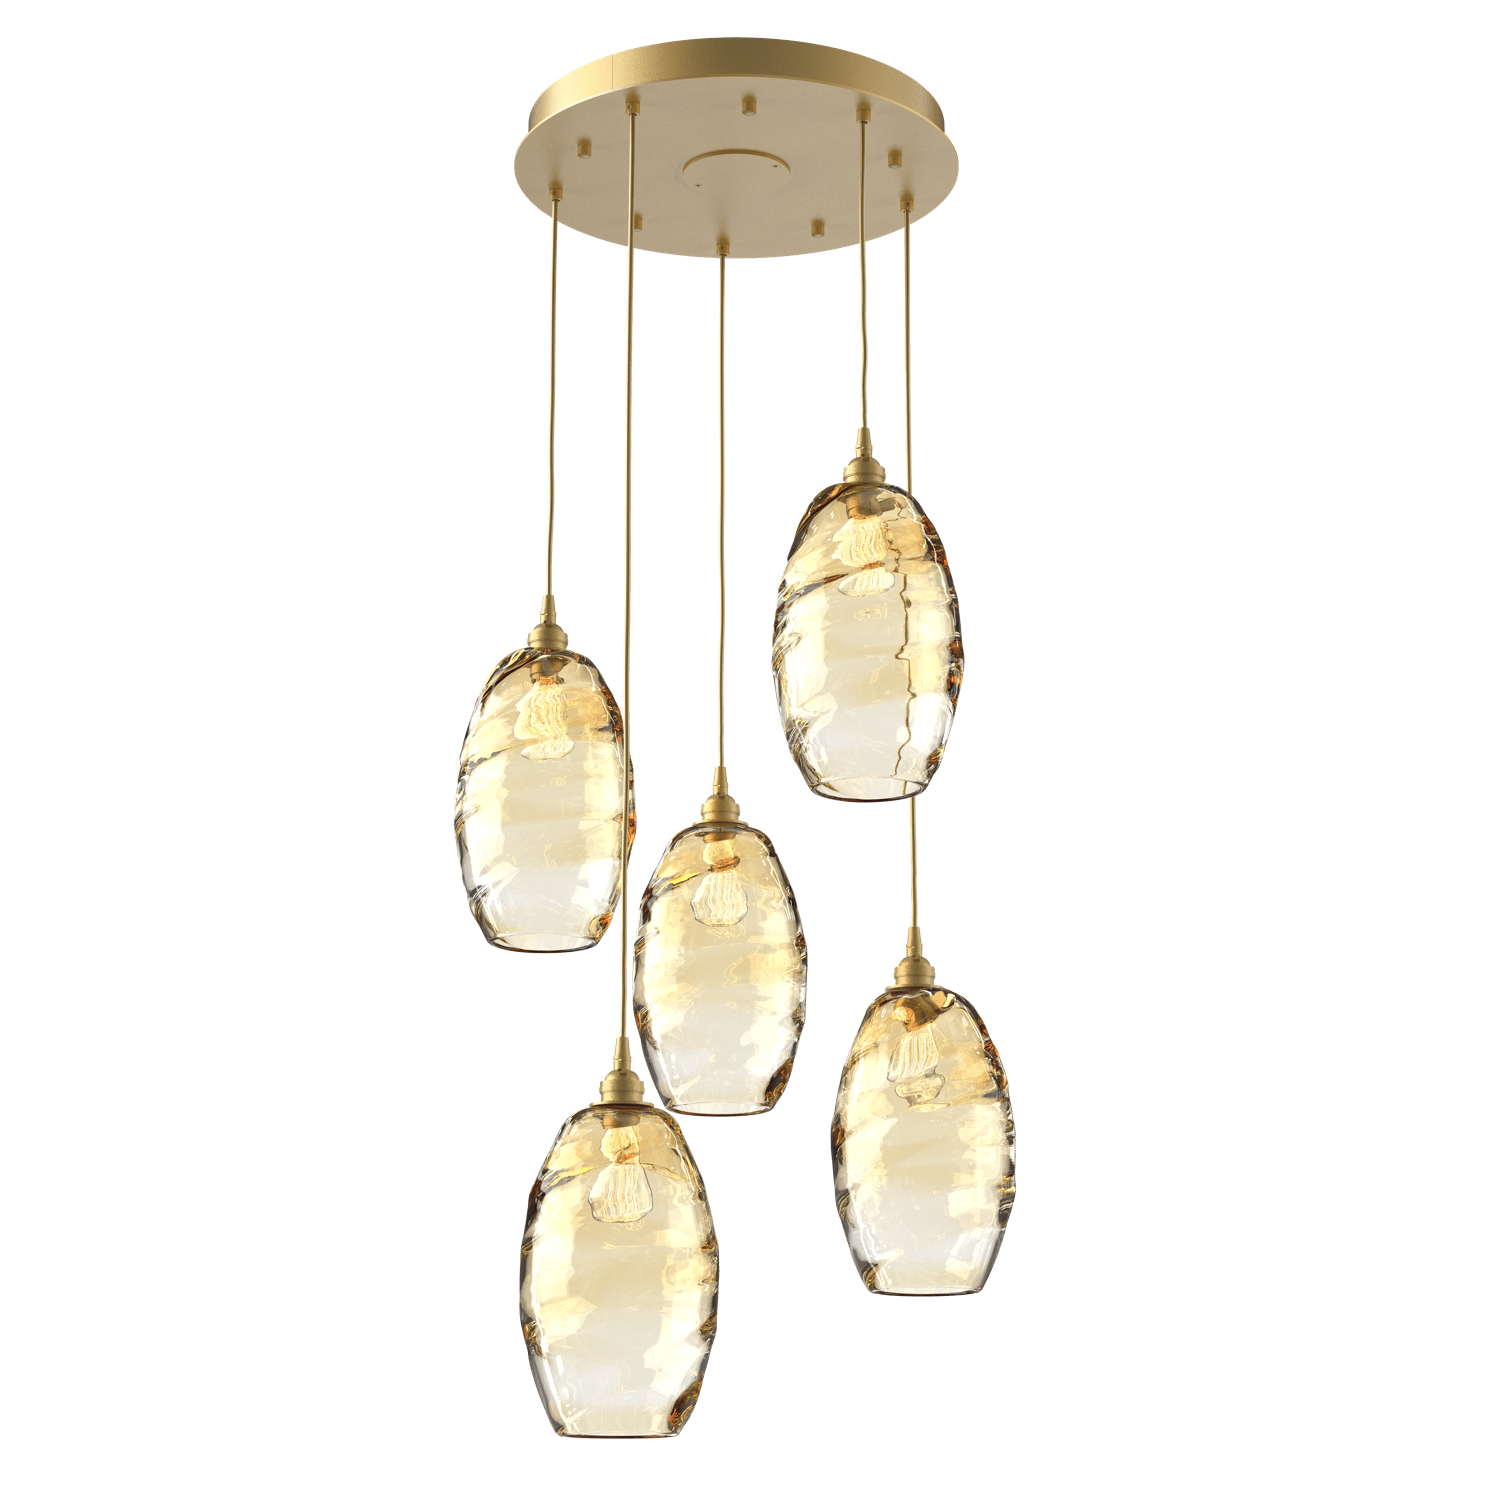 CHB0035-05-GB-OA-Hammerton-Studio-Optic-Blown-Glass-Elisse-5-light-round-pendant-chandelier-with-gilded-brass-finish-and-optic-amber-blown-glass-shades-and-incandescent-lamping